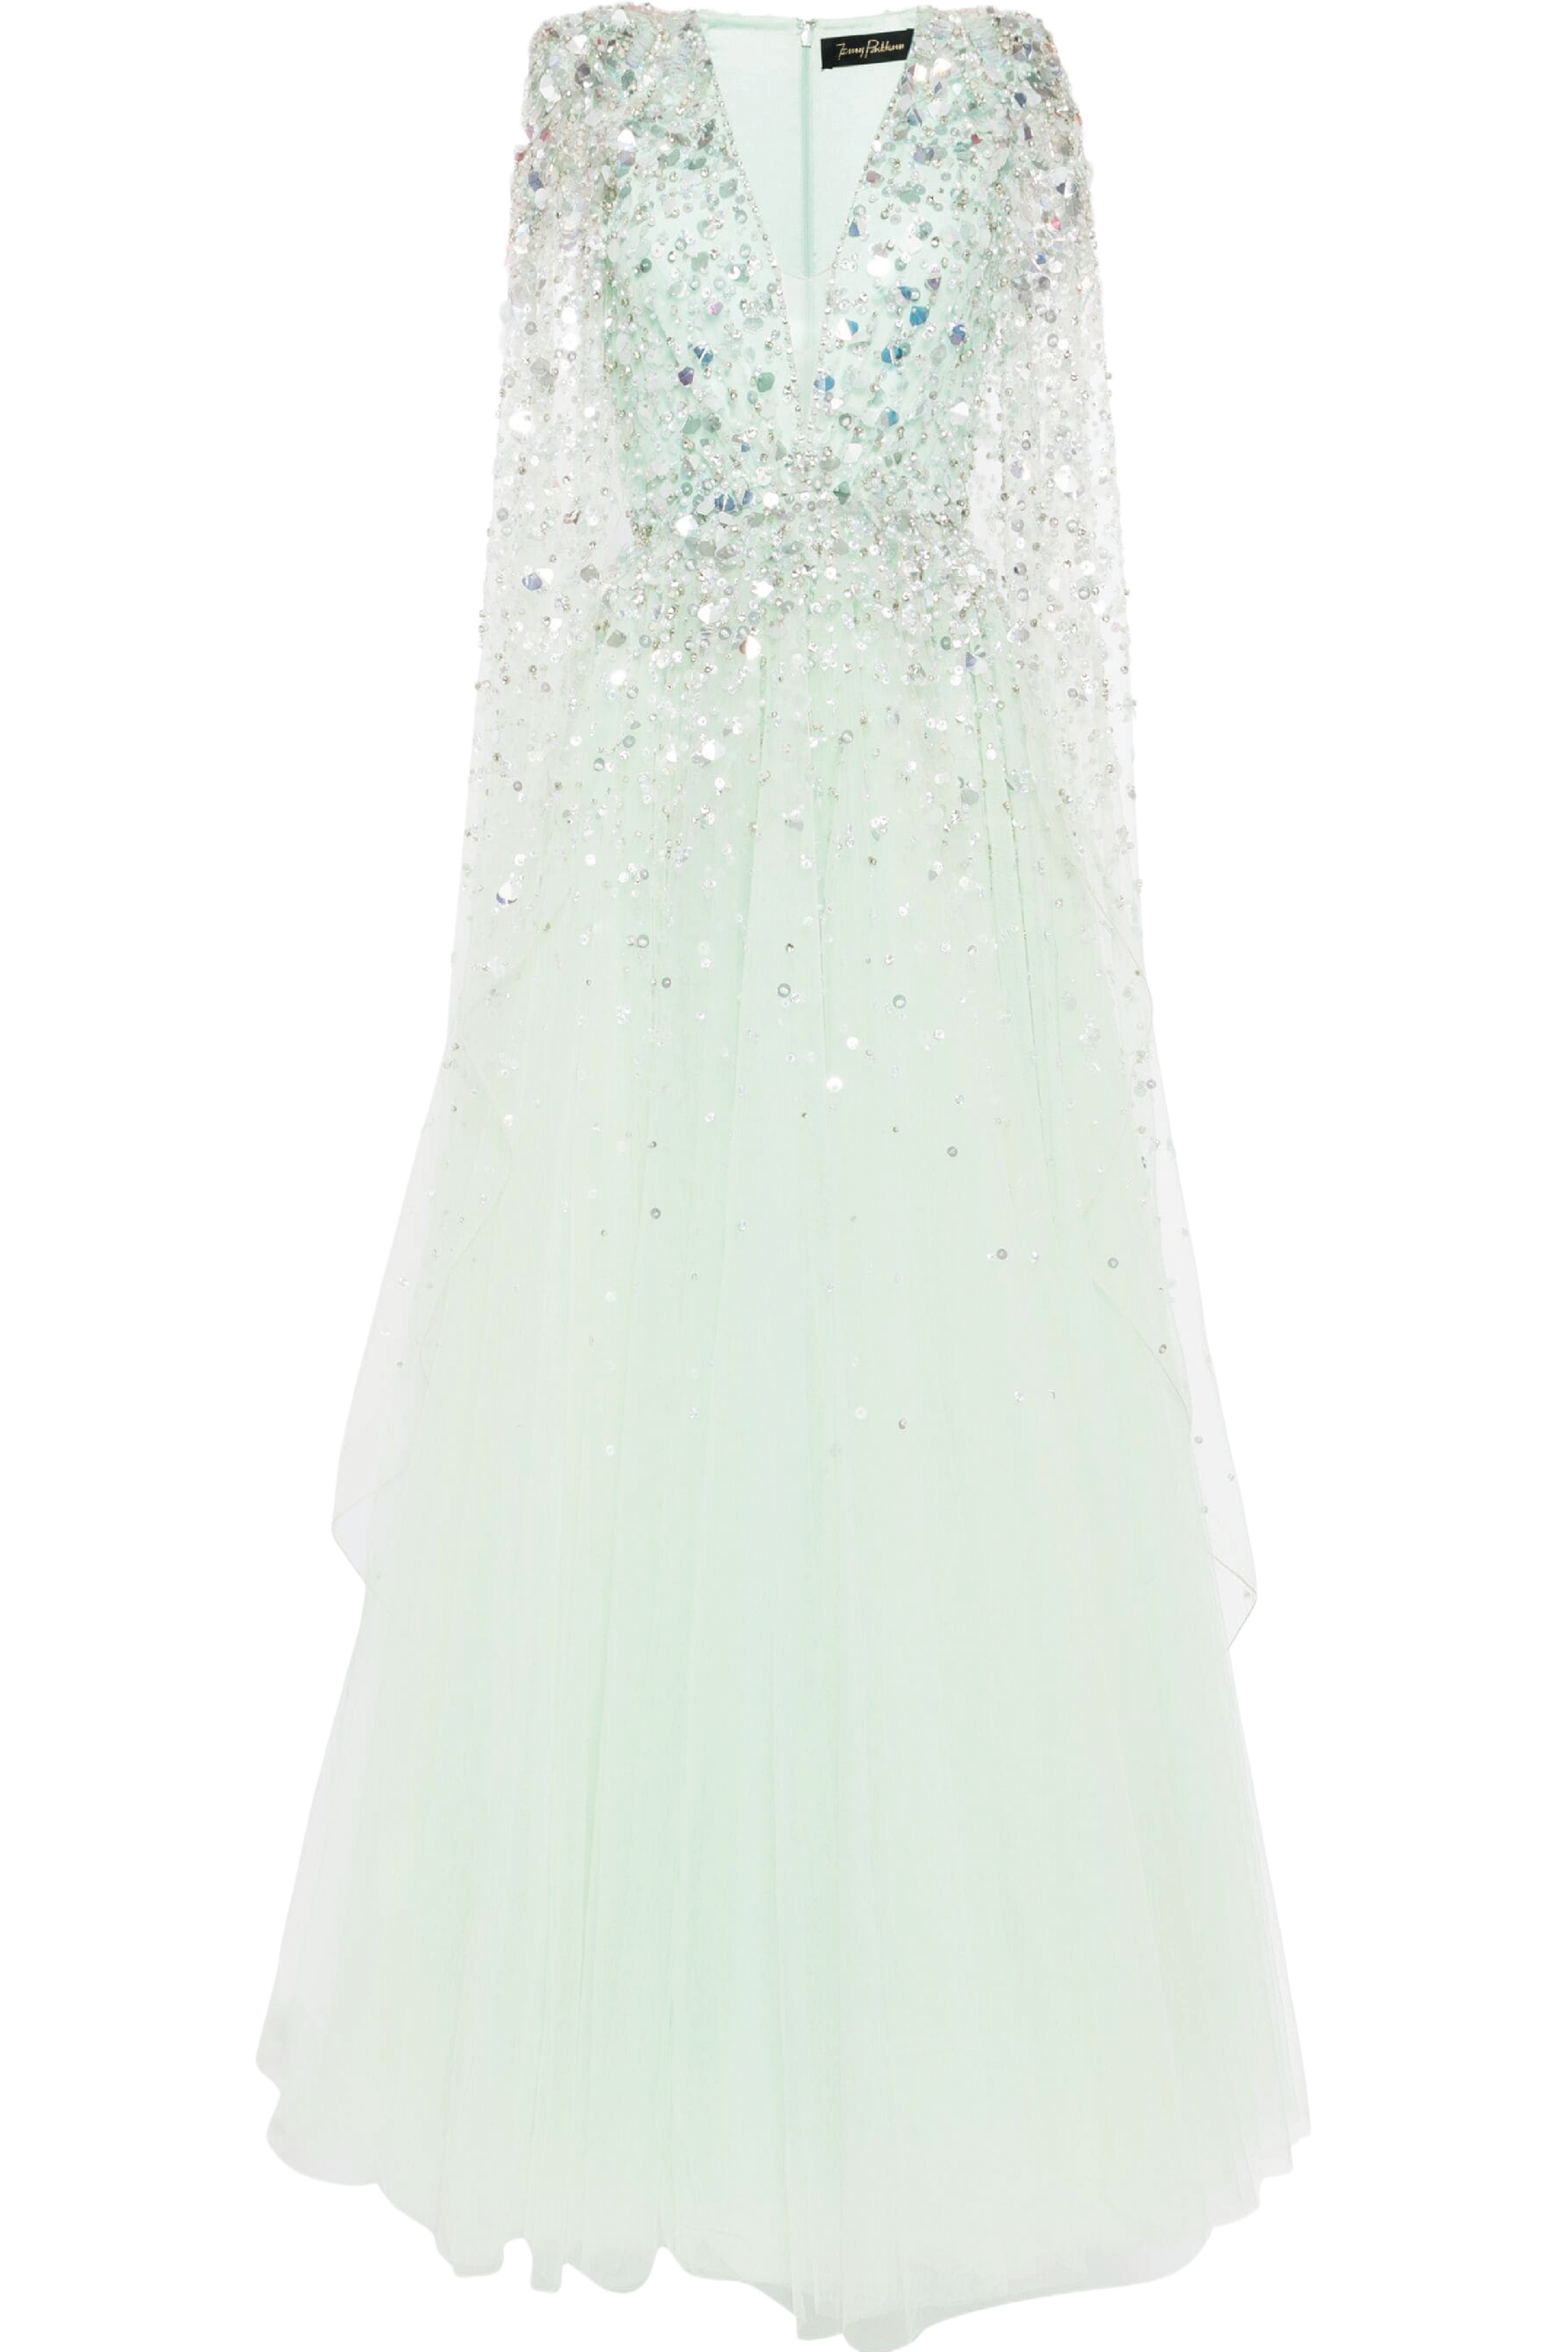 Alondra Sequin Embellished Cape Gown